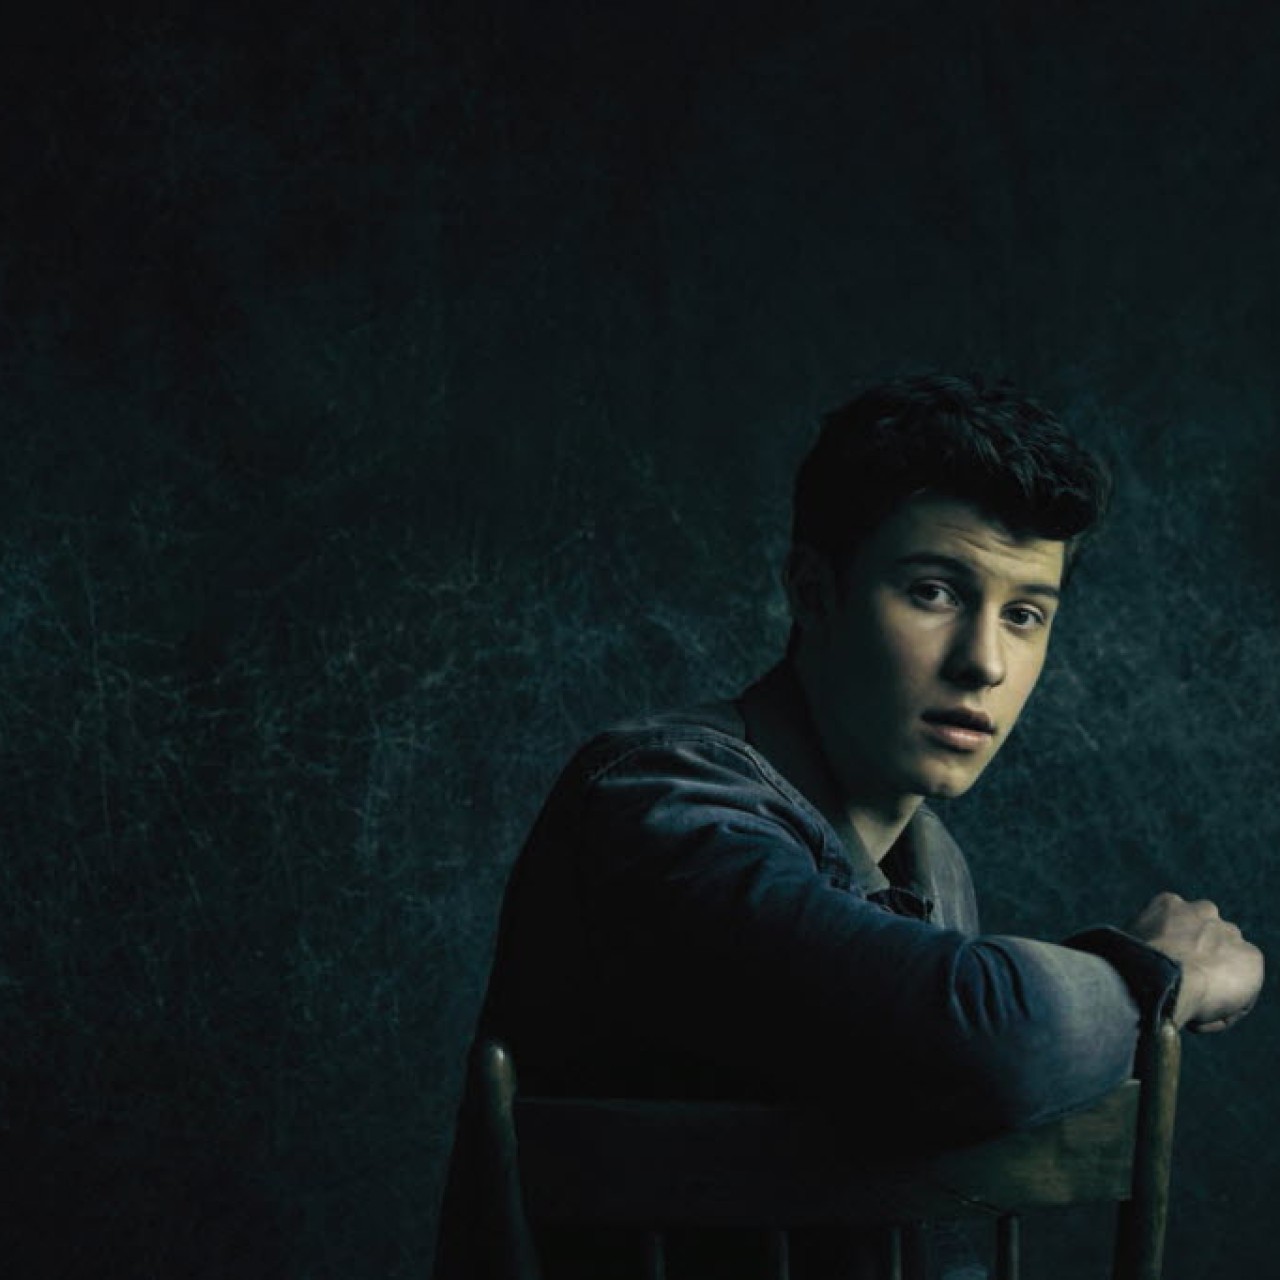 Shawn mendes confirms hes dating camila cabello after a summer of speculation